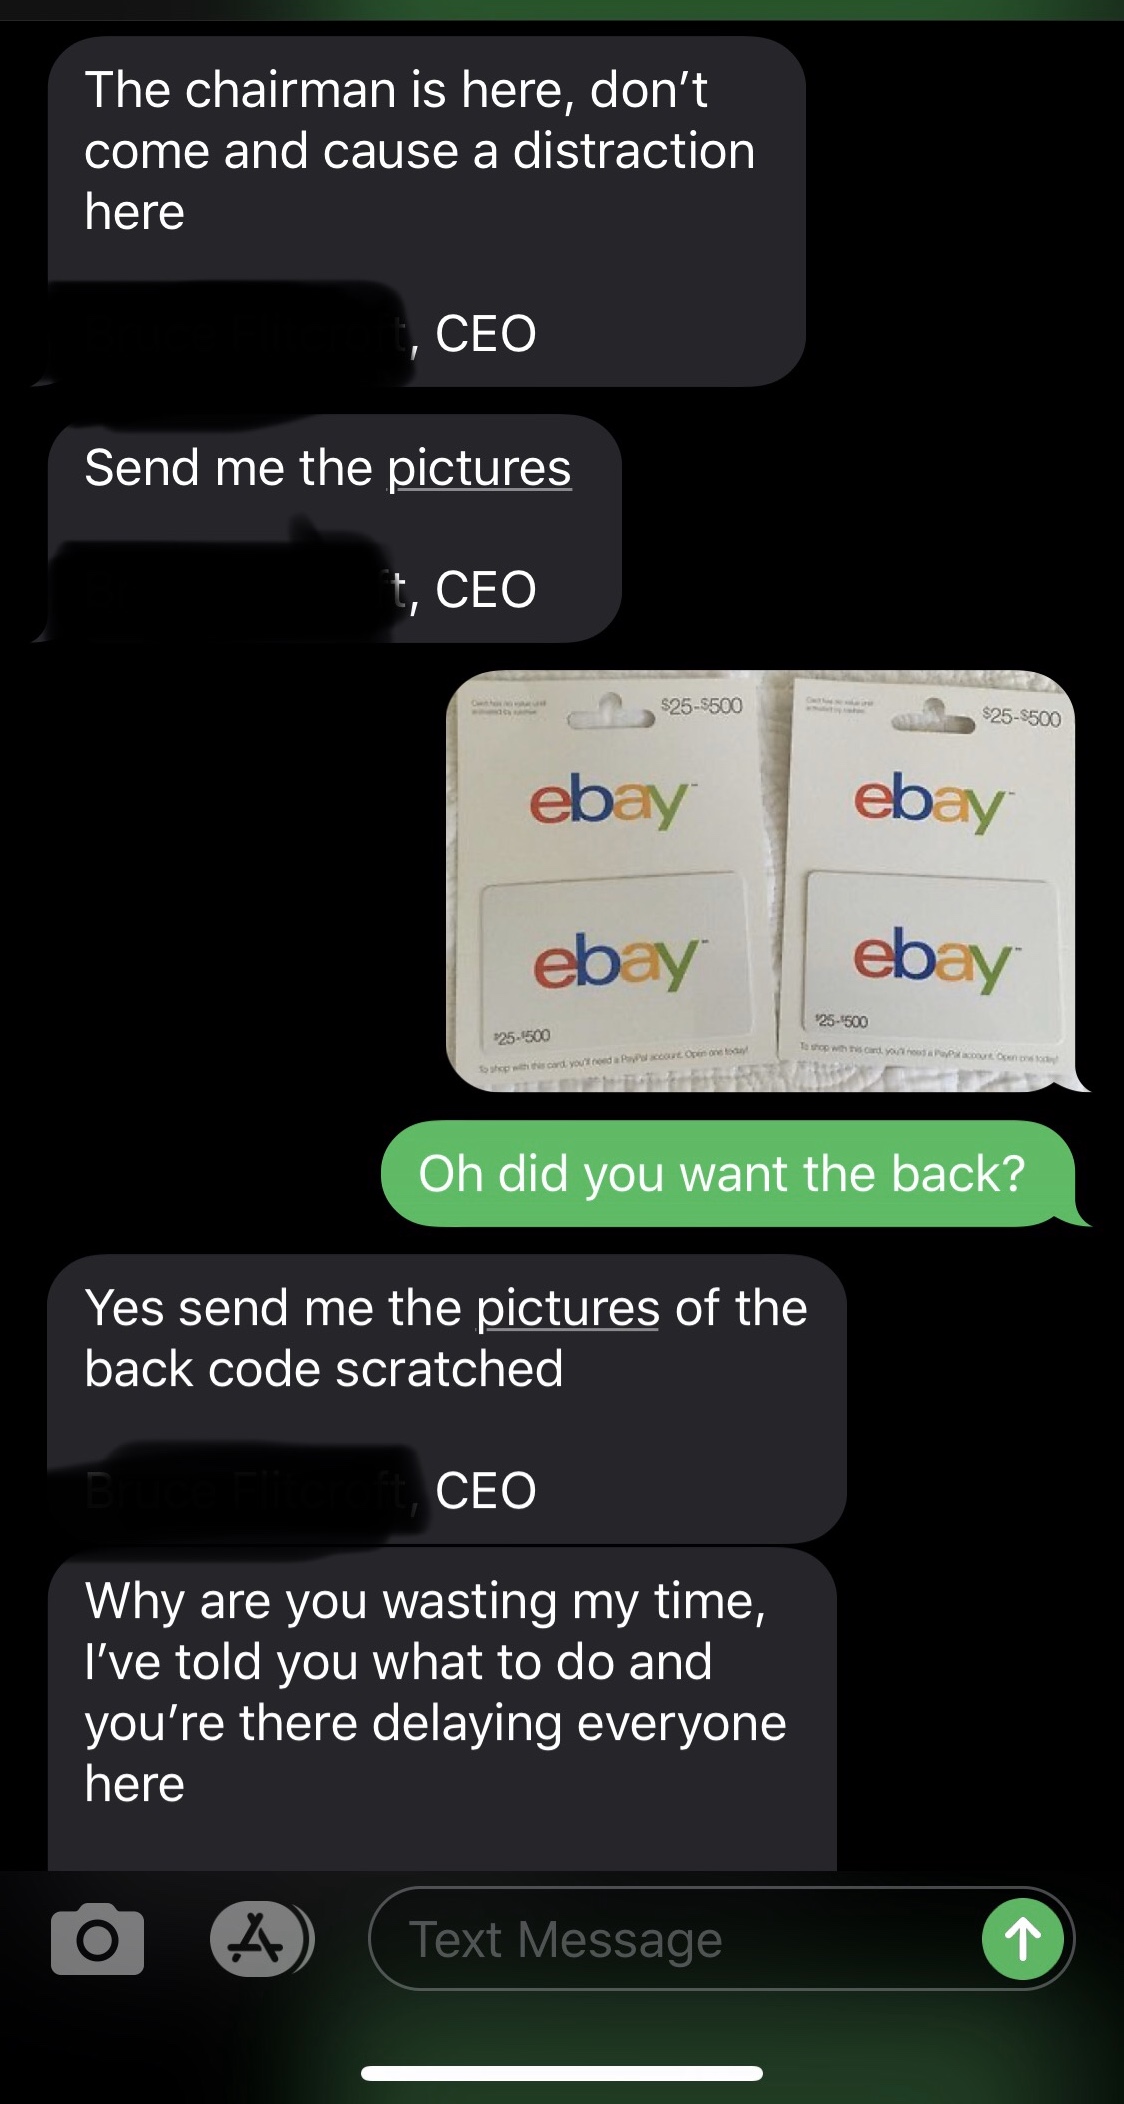 ebay - The chairman is here, don't come and cause a distraction here Ceo Send me the pictures t, Ceo 525S500 $25$500 ebay ebay ebay ebay 251500 251500 To co wis and other country out on to card you're Oh did you want the back? Yes send me the pictures of 